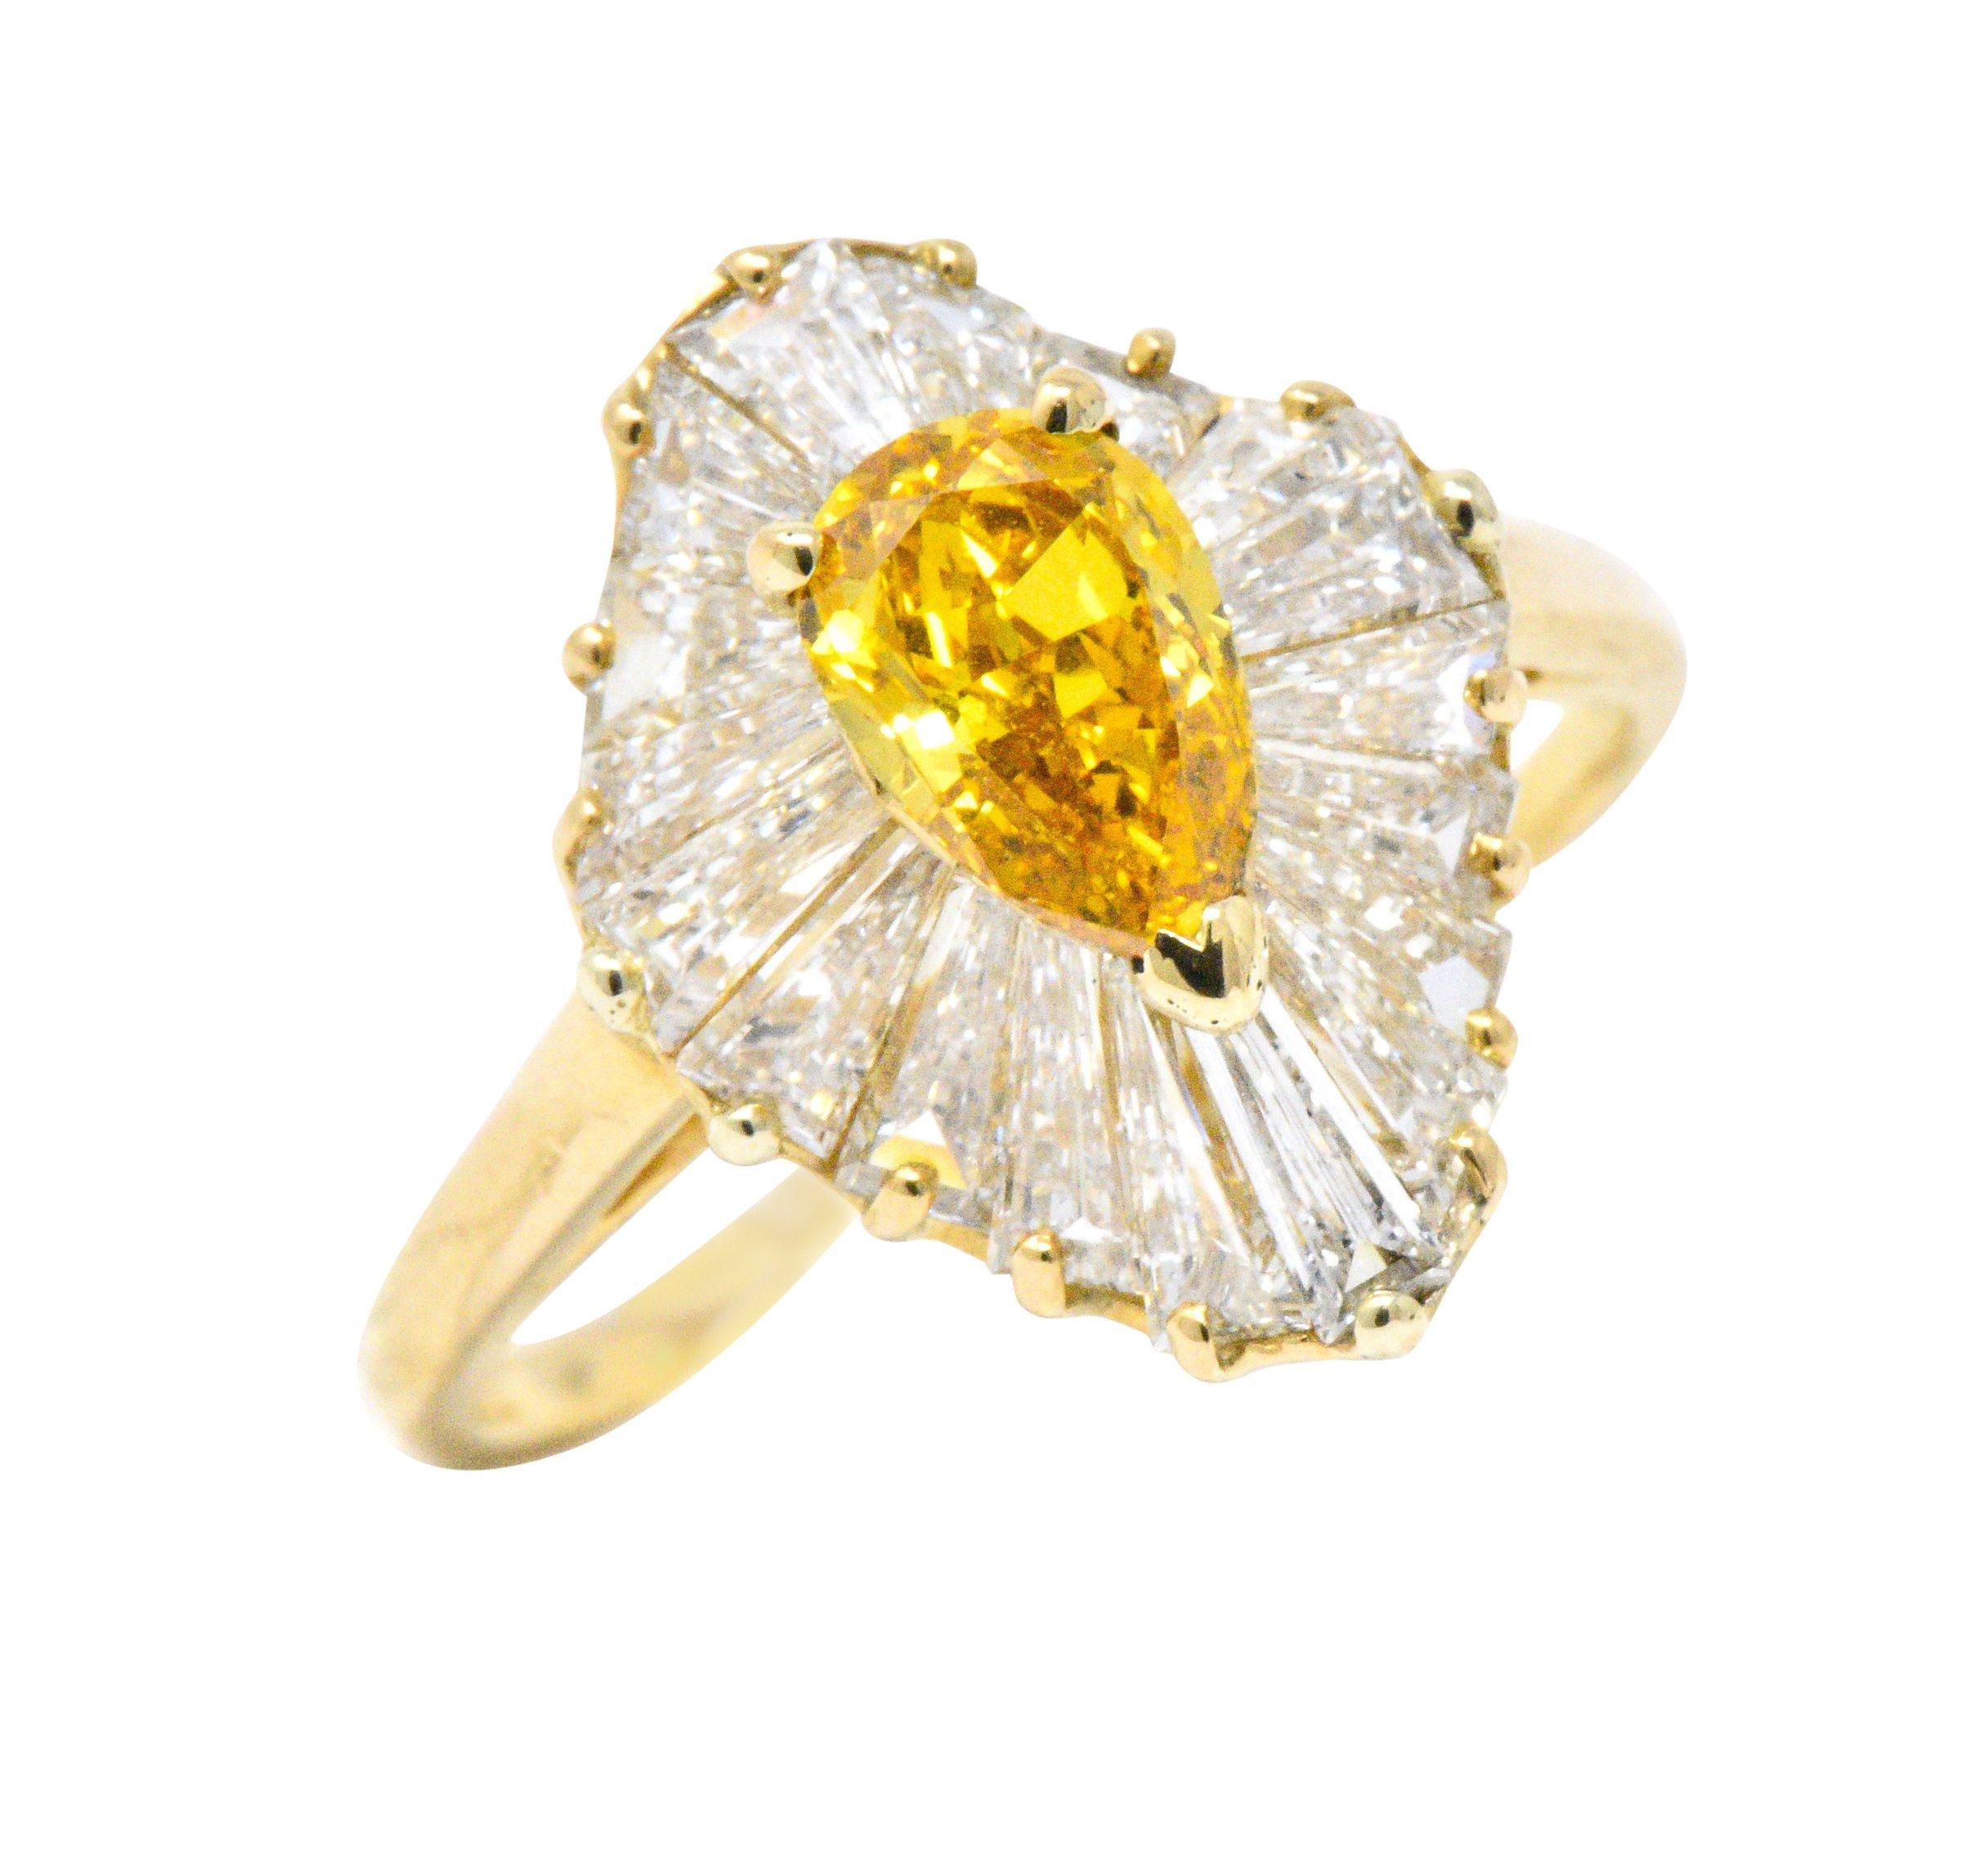 Centering a pear cut fancy colored diamond weighing 0.74 carat, natural vivid yellow-orange in color with VS2  clarity

Surrounded by a dynamic ballerina halo of tapered baguette cut diamonds weighing 
approximately 2.00 carats, E/F color with VS